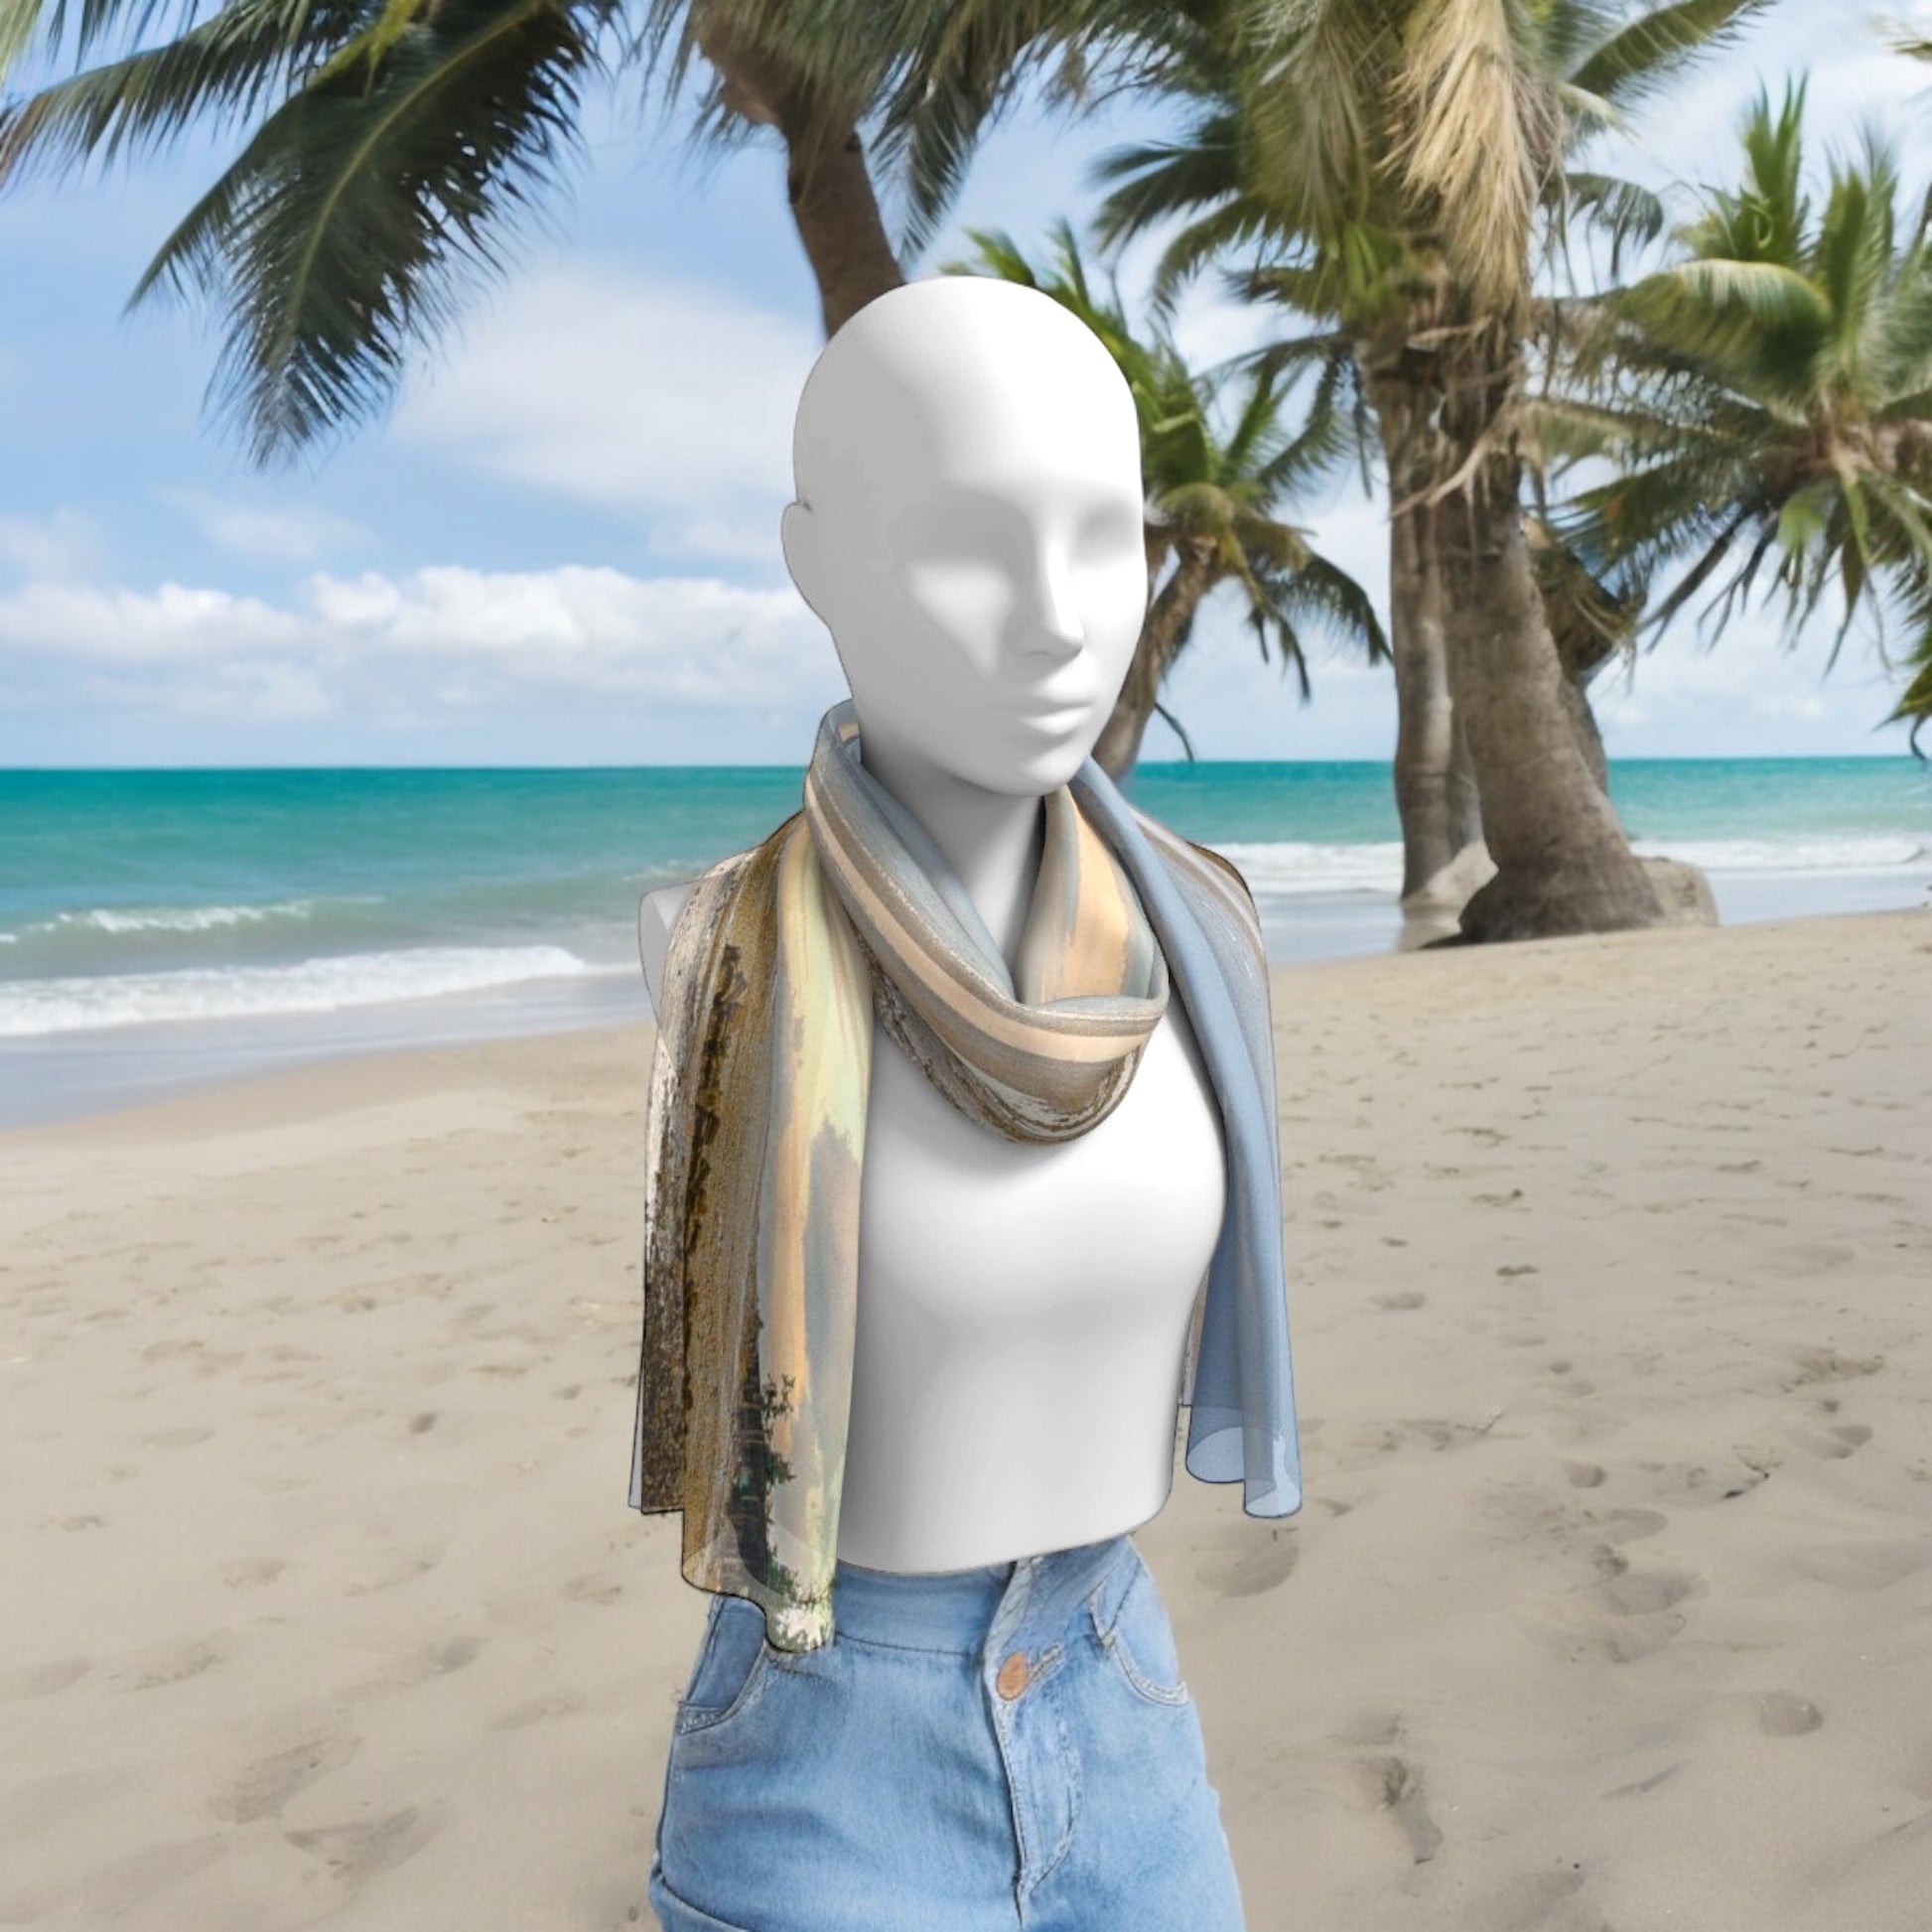 Miracle Beach Long Scarf worn around the neck of someone walking along the beach